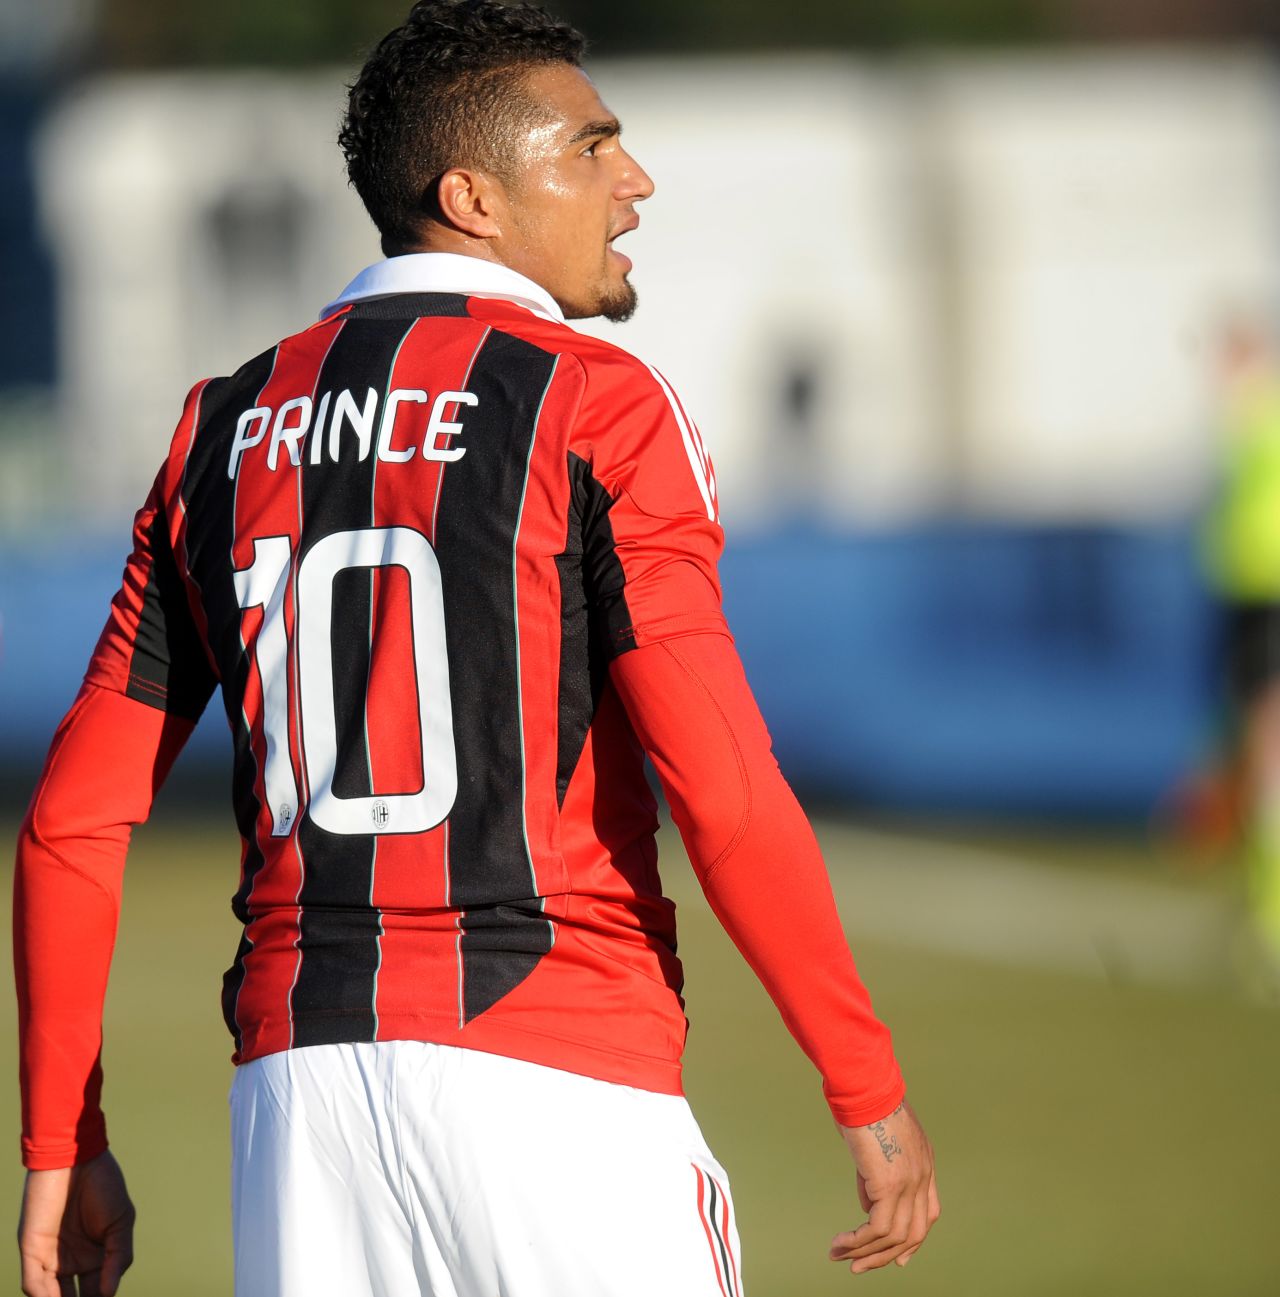 The spark for a raft of racism reforms from the game's power brokers came when AC Milan midfielder Kevin-Prince Boateng walked off in a match with Italian lower league side Pro Patria in January after their fans abused him with monkey noises. The game was abandoned and his protest made headline news the world over.